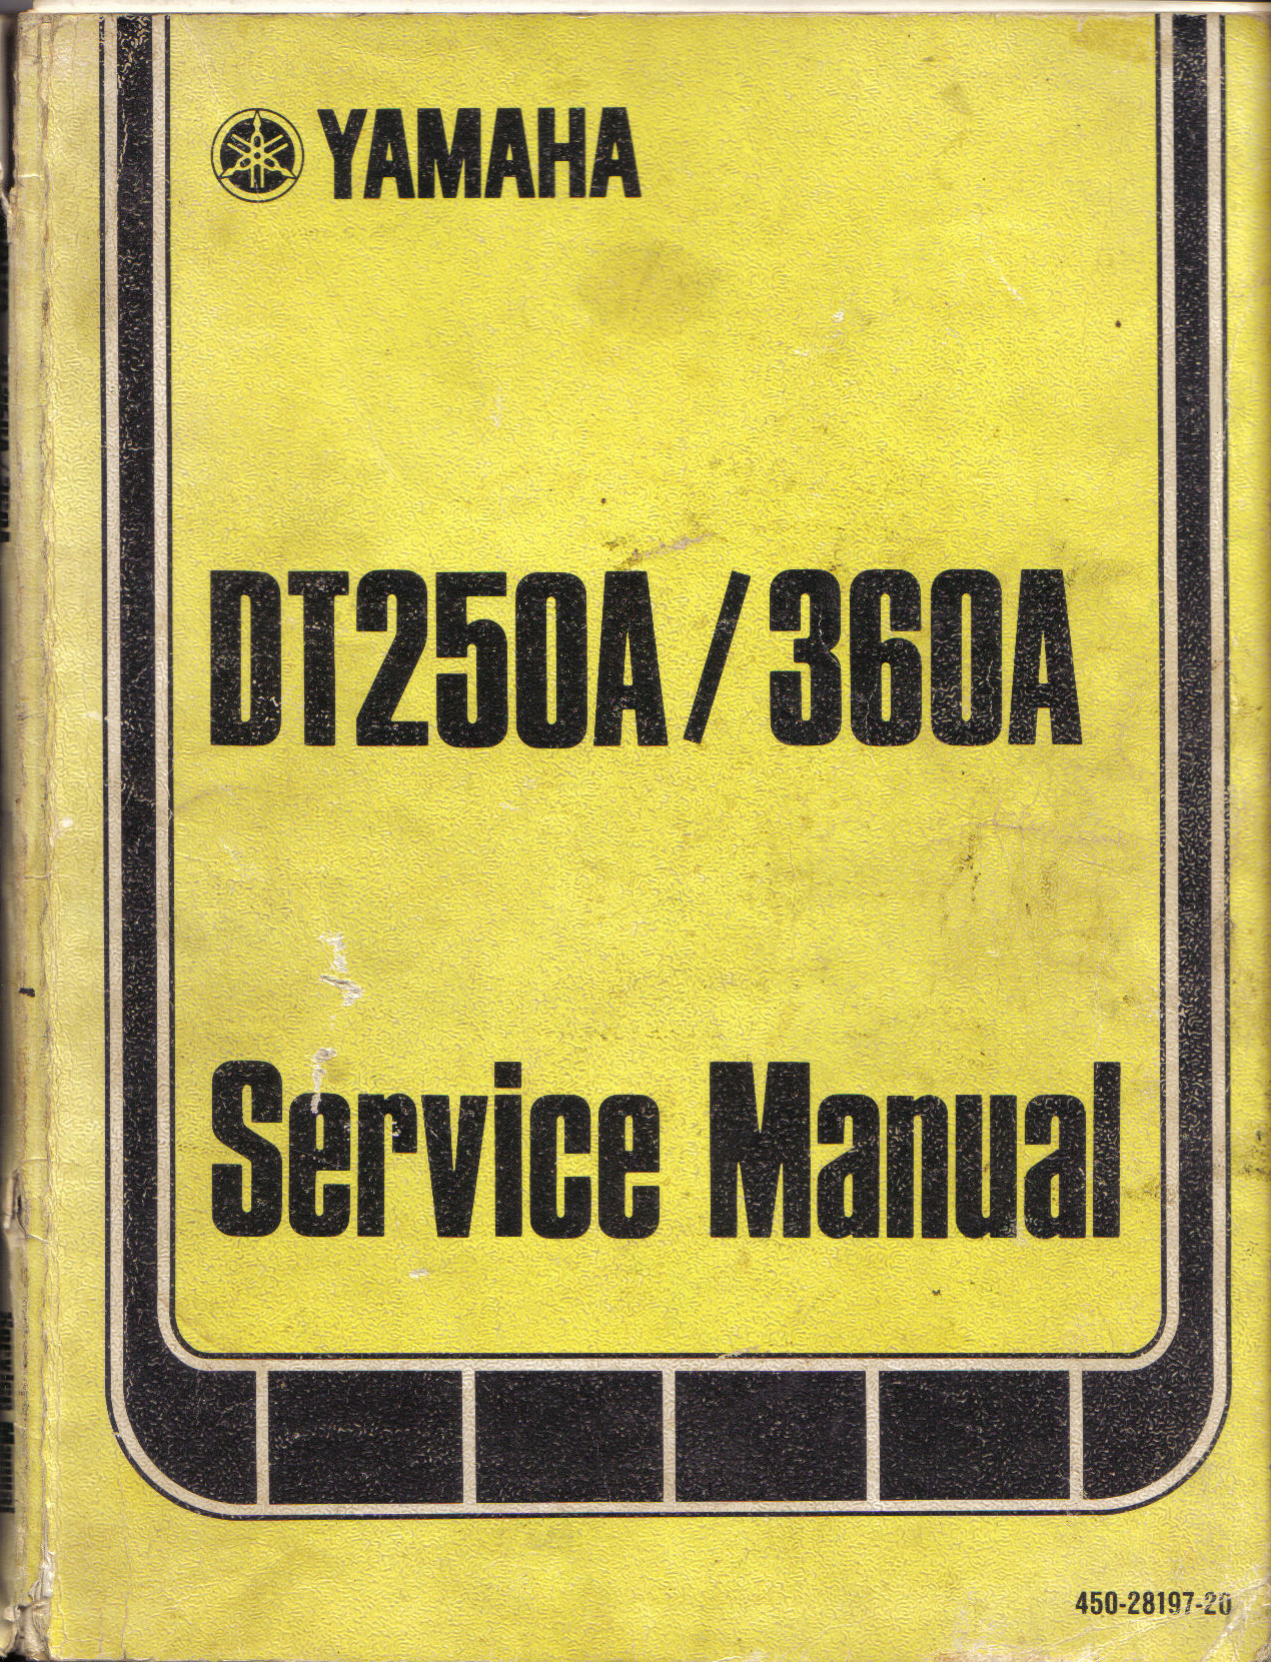 1974 Yamaha DT250A/360A service manual Preview image 6